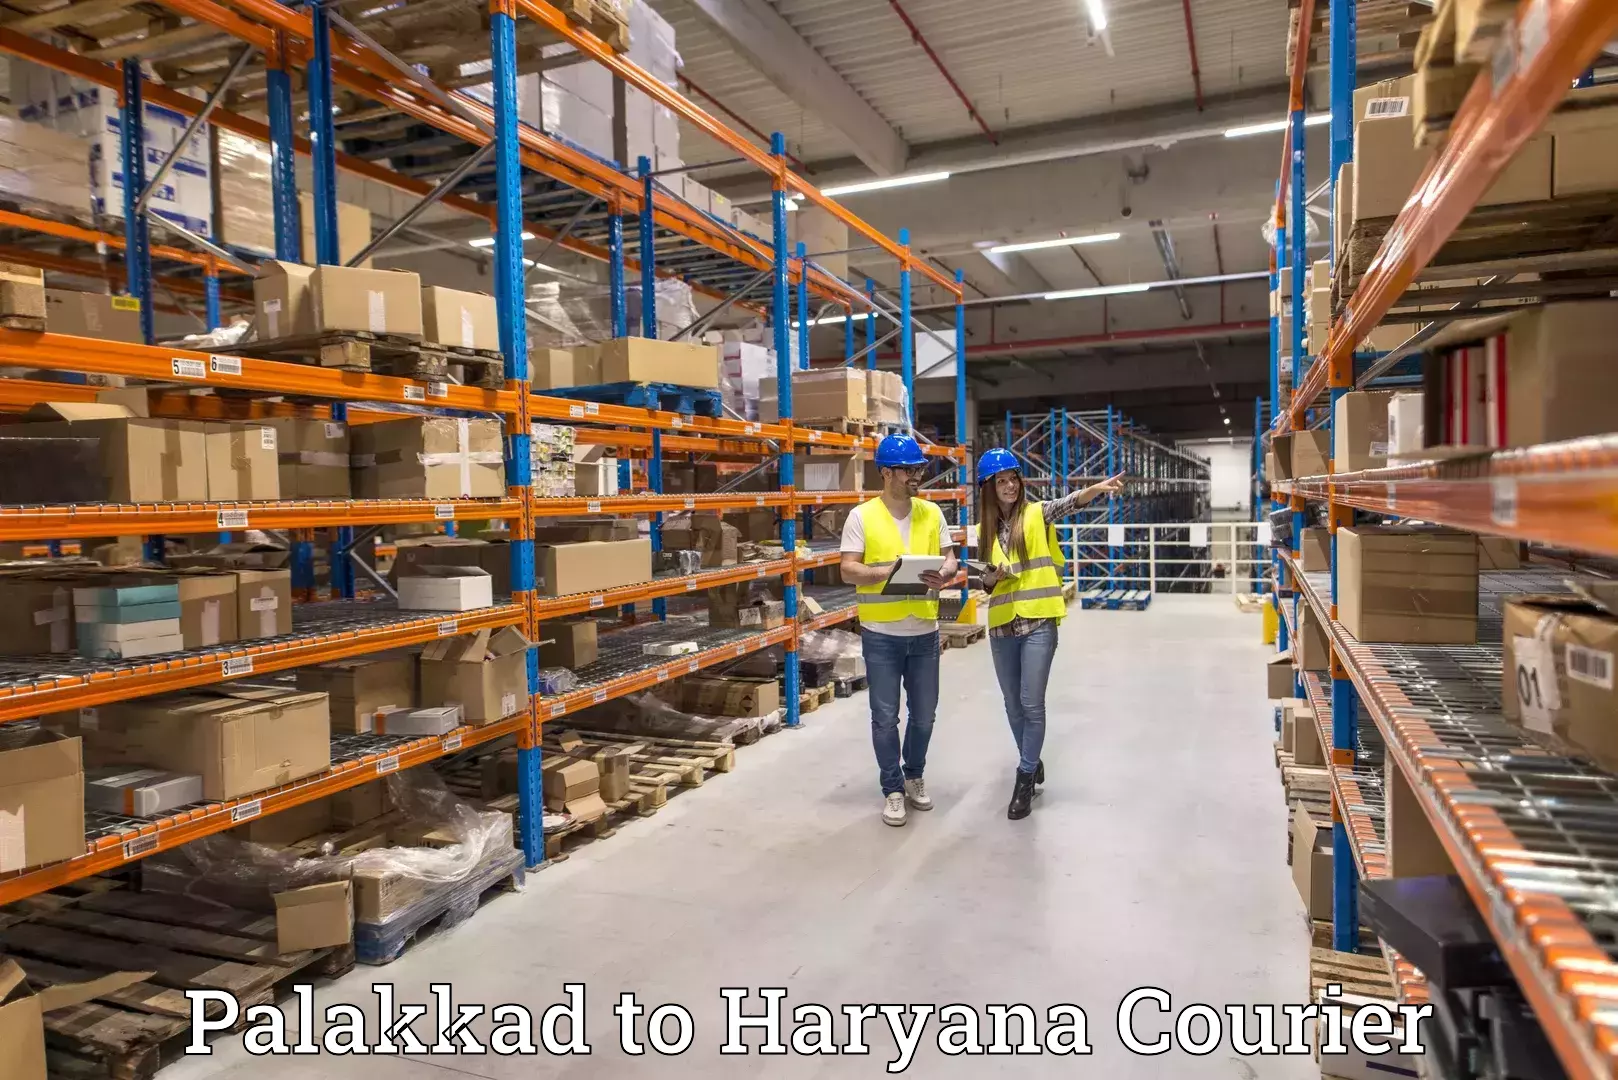 Customizable delivery plans Palakkad to NCR Haryana